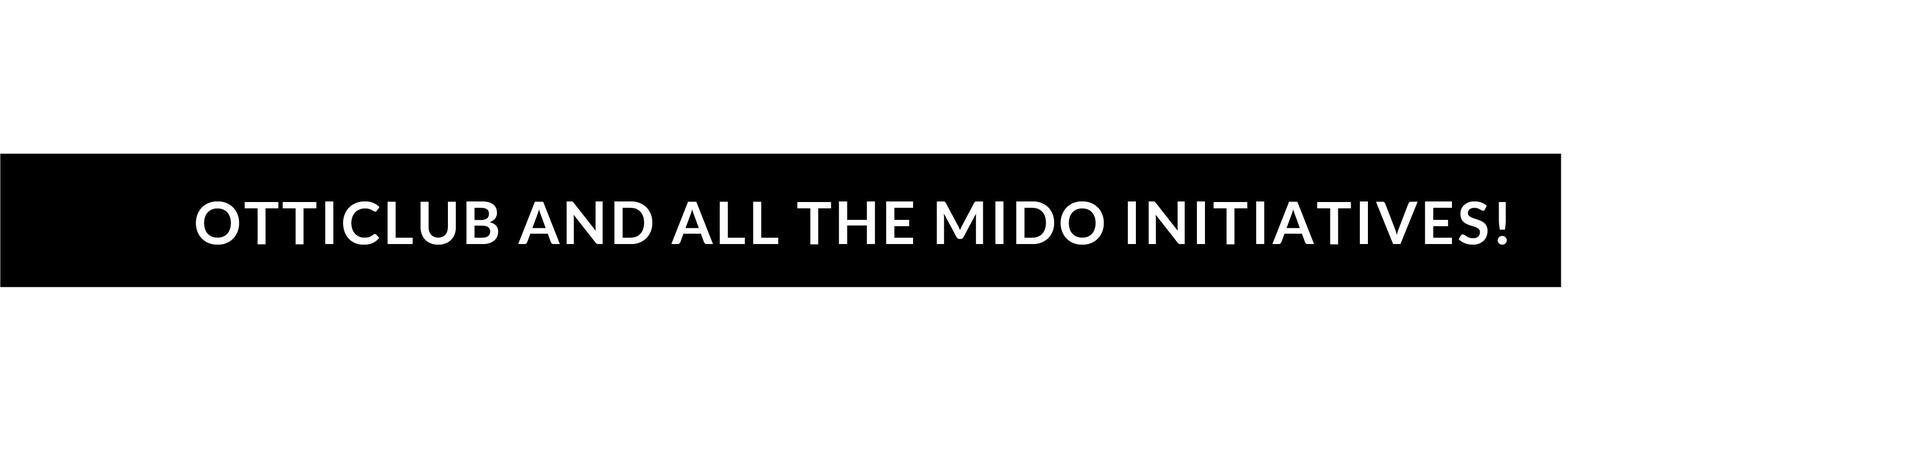 Otticlub and all the MIDO initiatives!